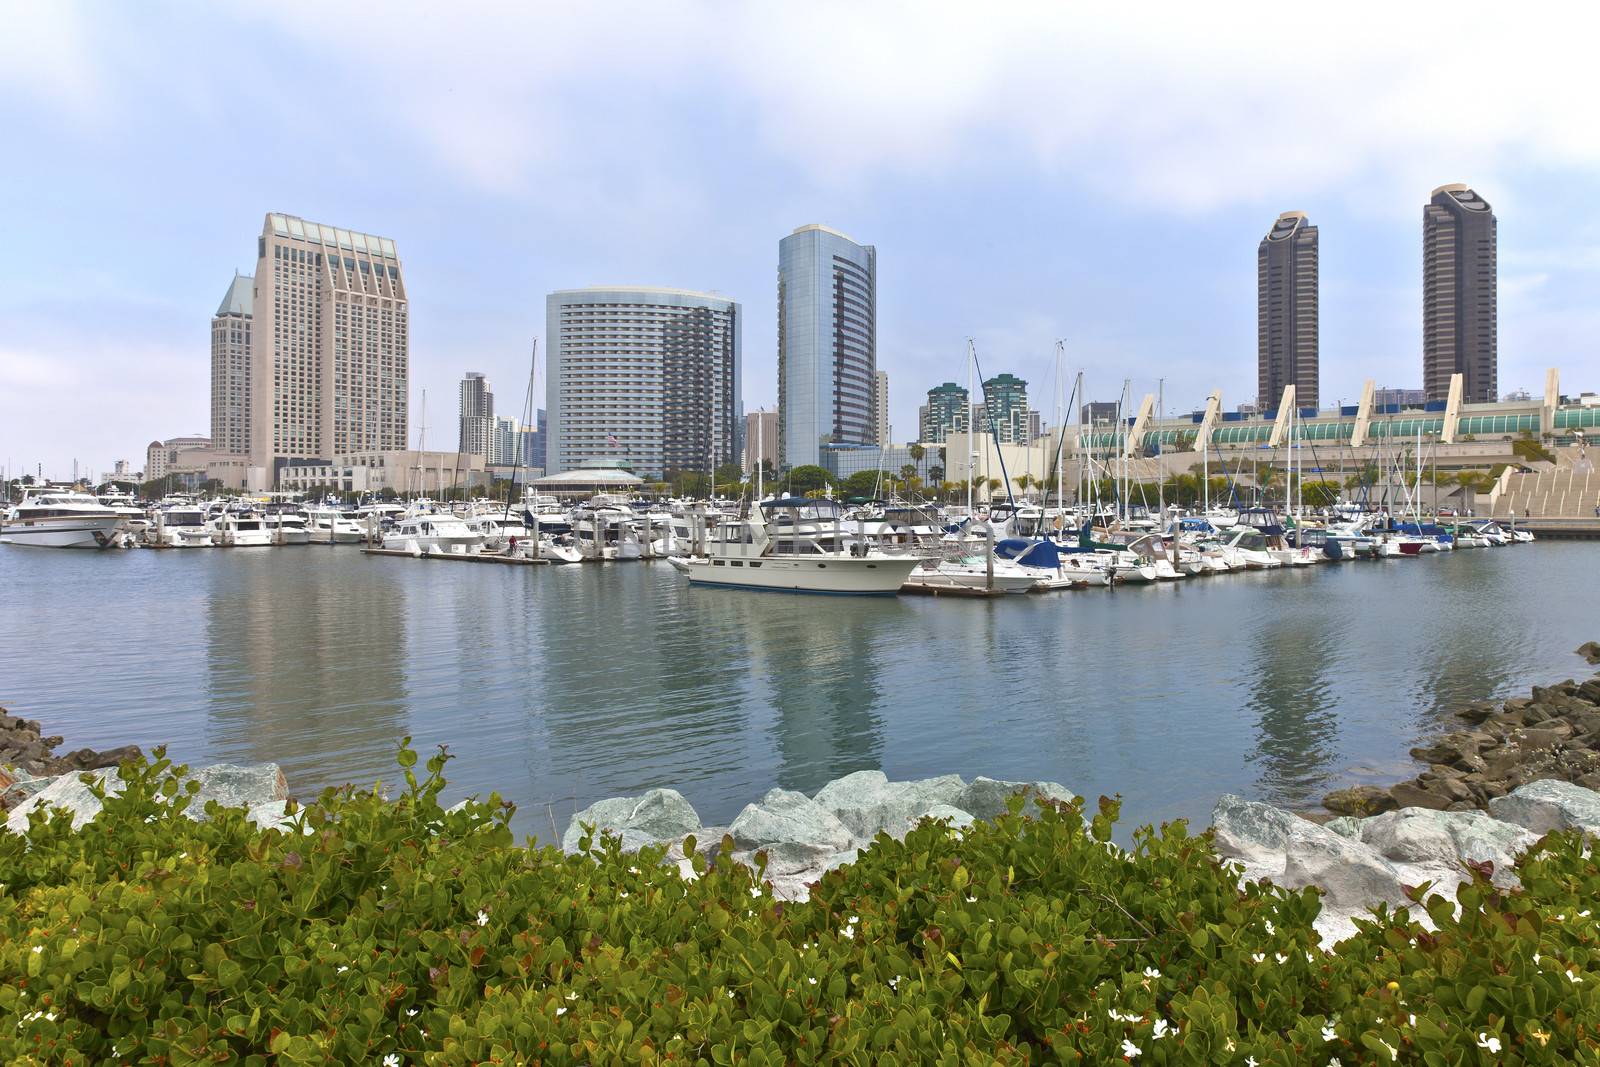 San Diego marina and the downtown buildings. by Rigucci